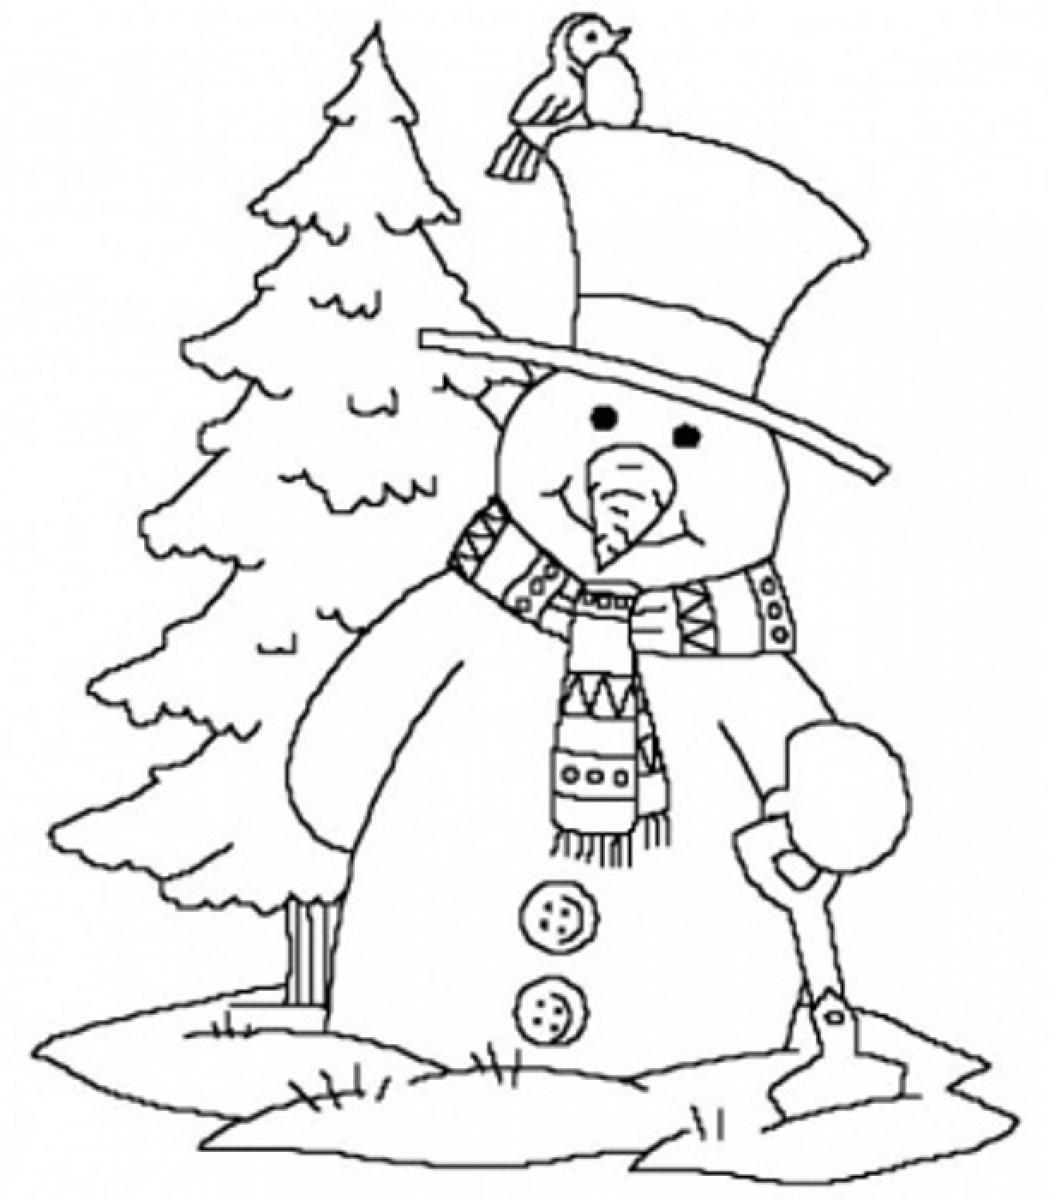 Printable Winter Coloring Pages ColoringMe com